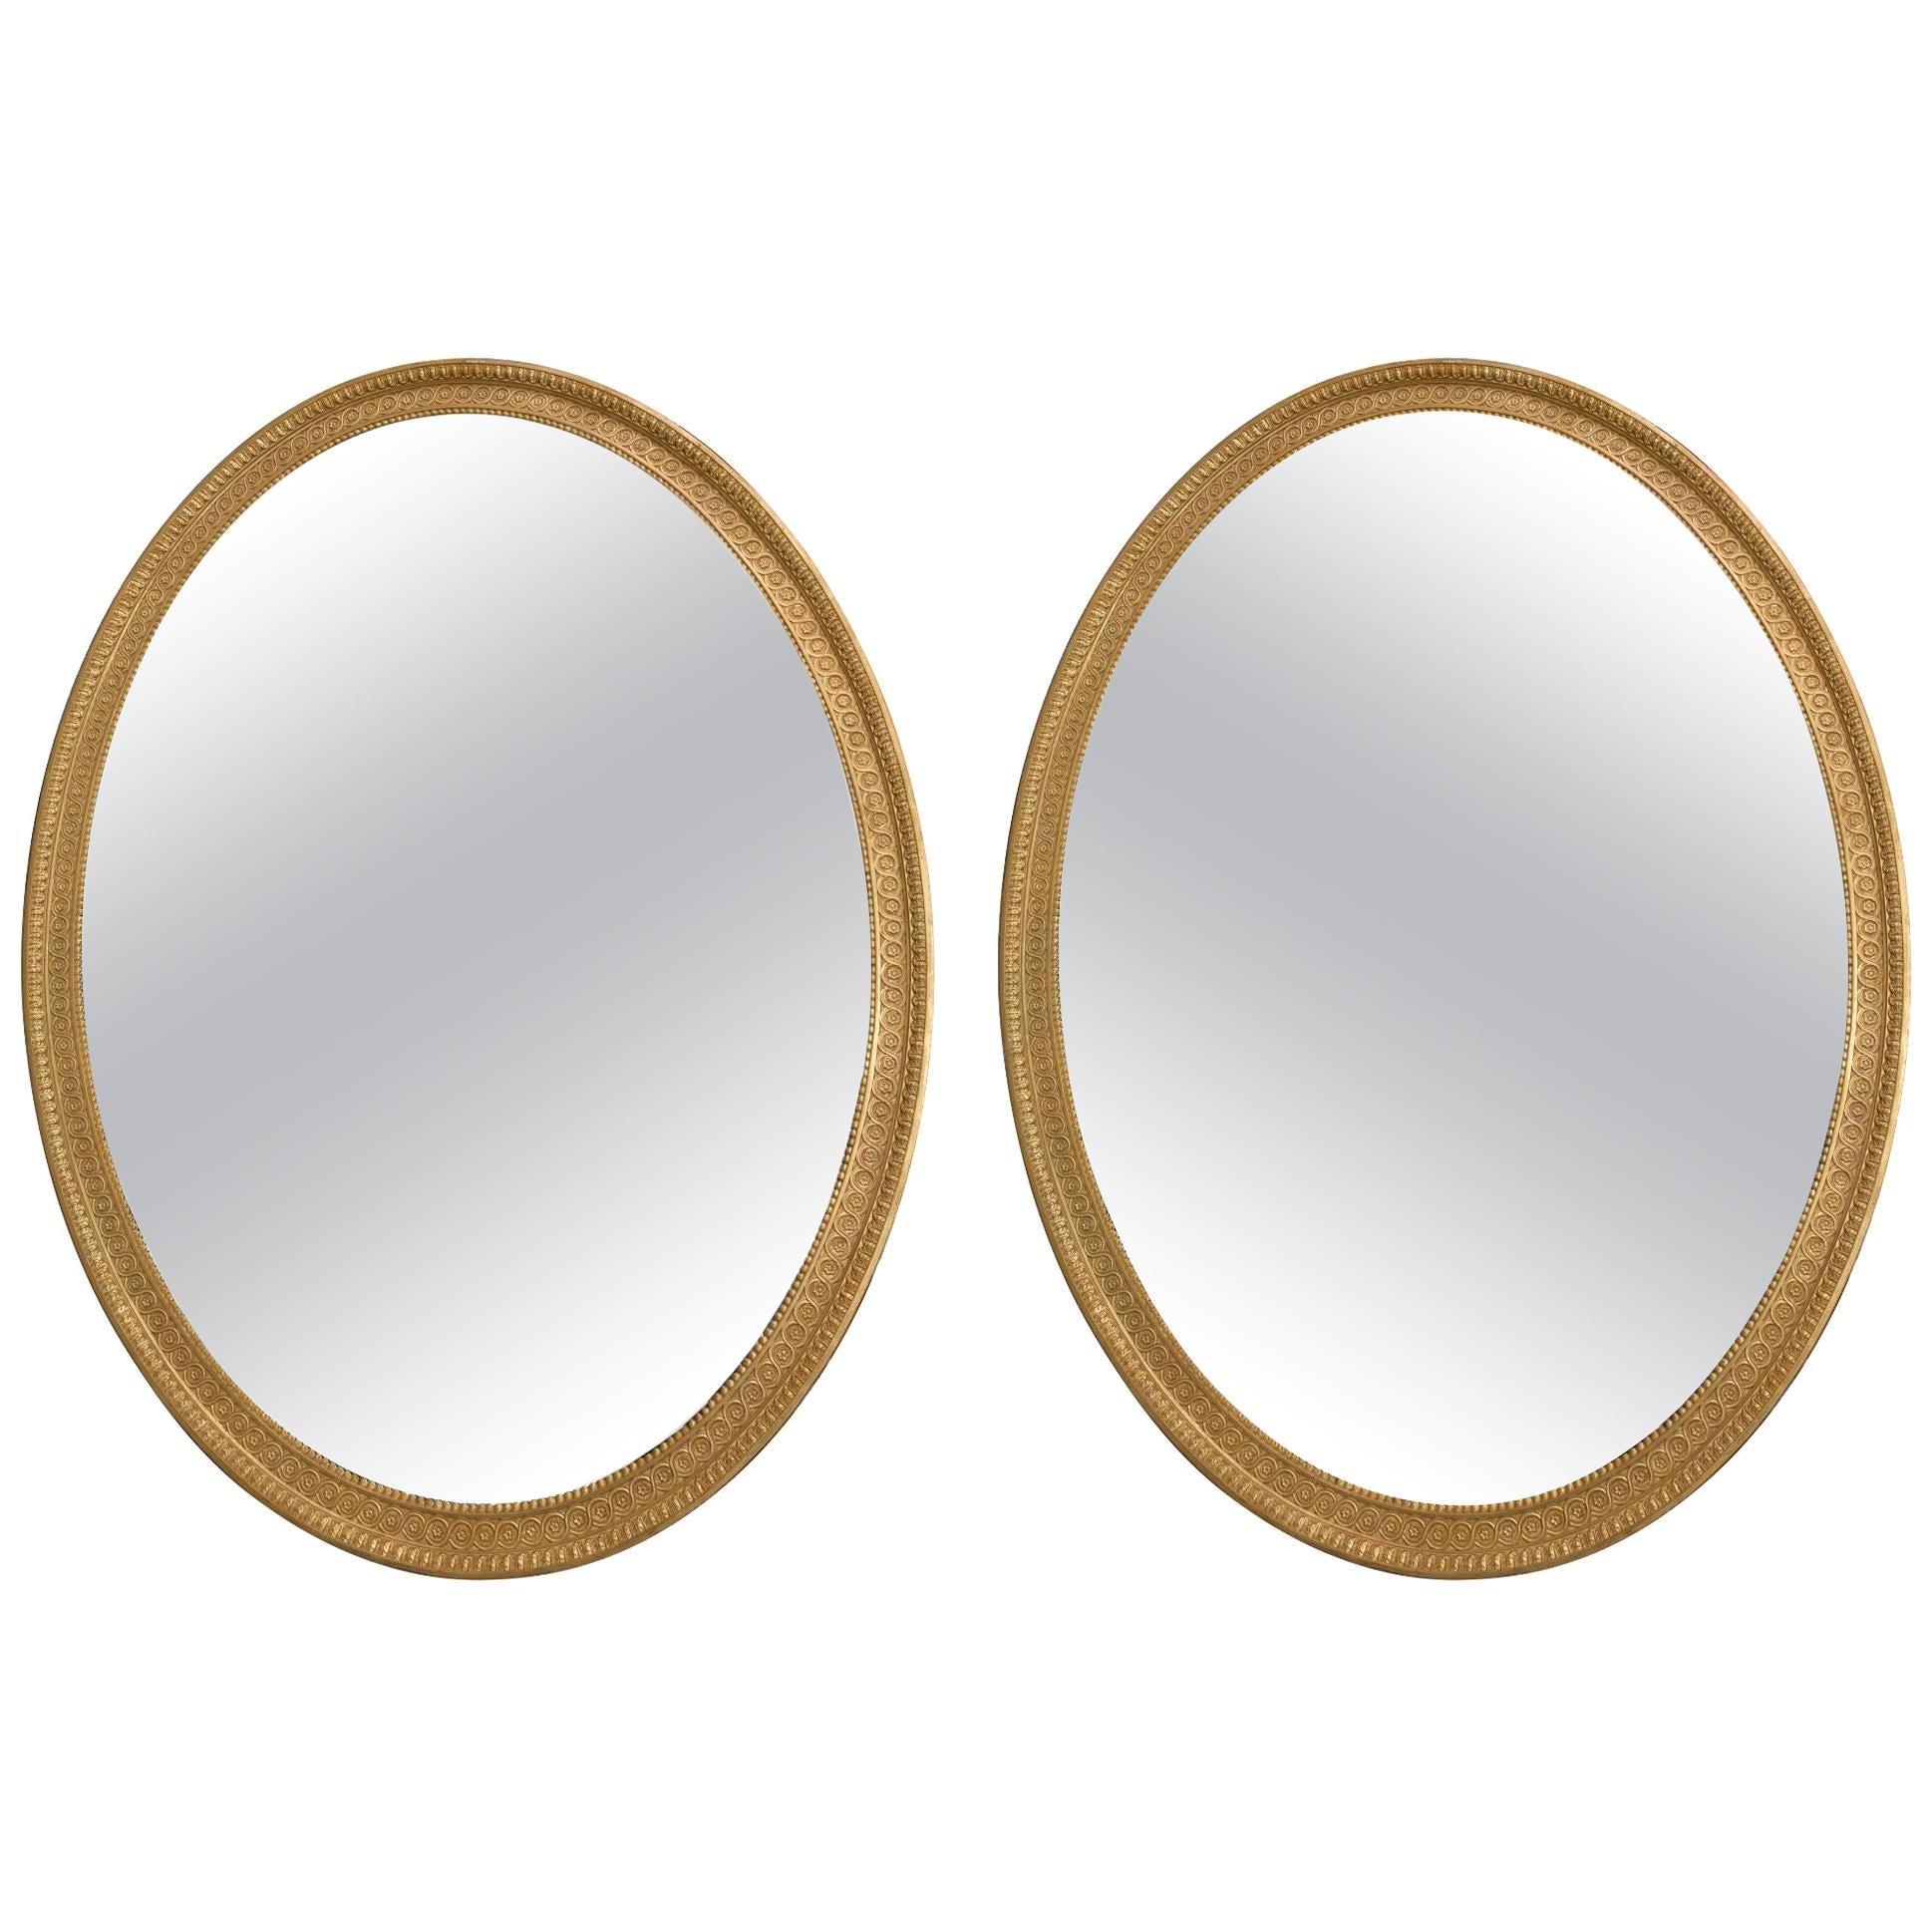 Pair of George III Style Oval Mirrors For Sale